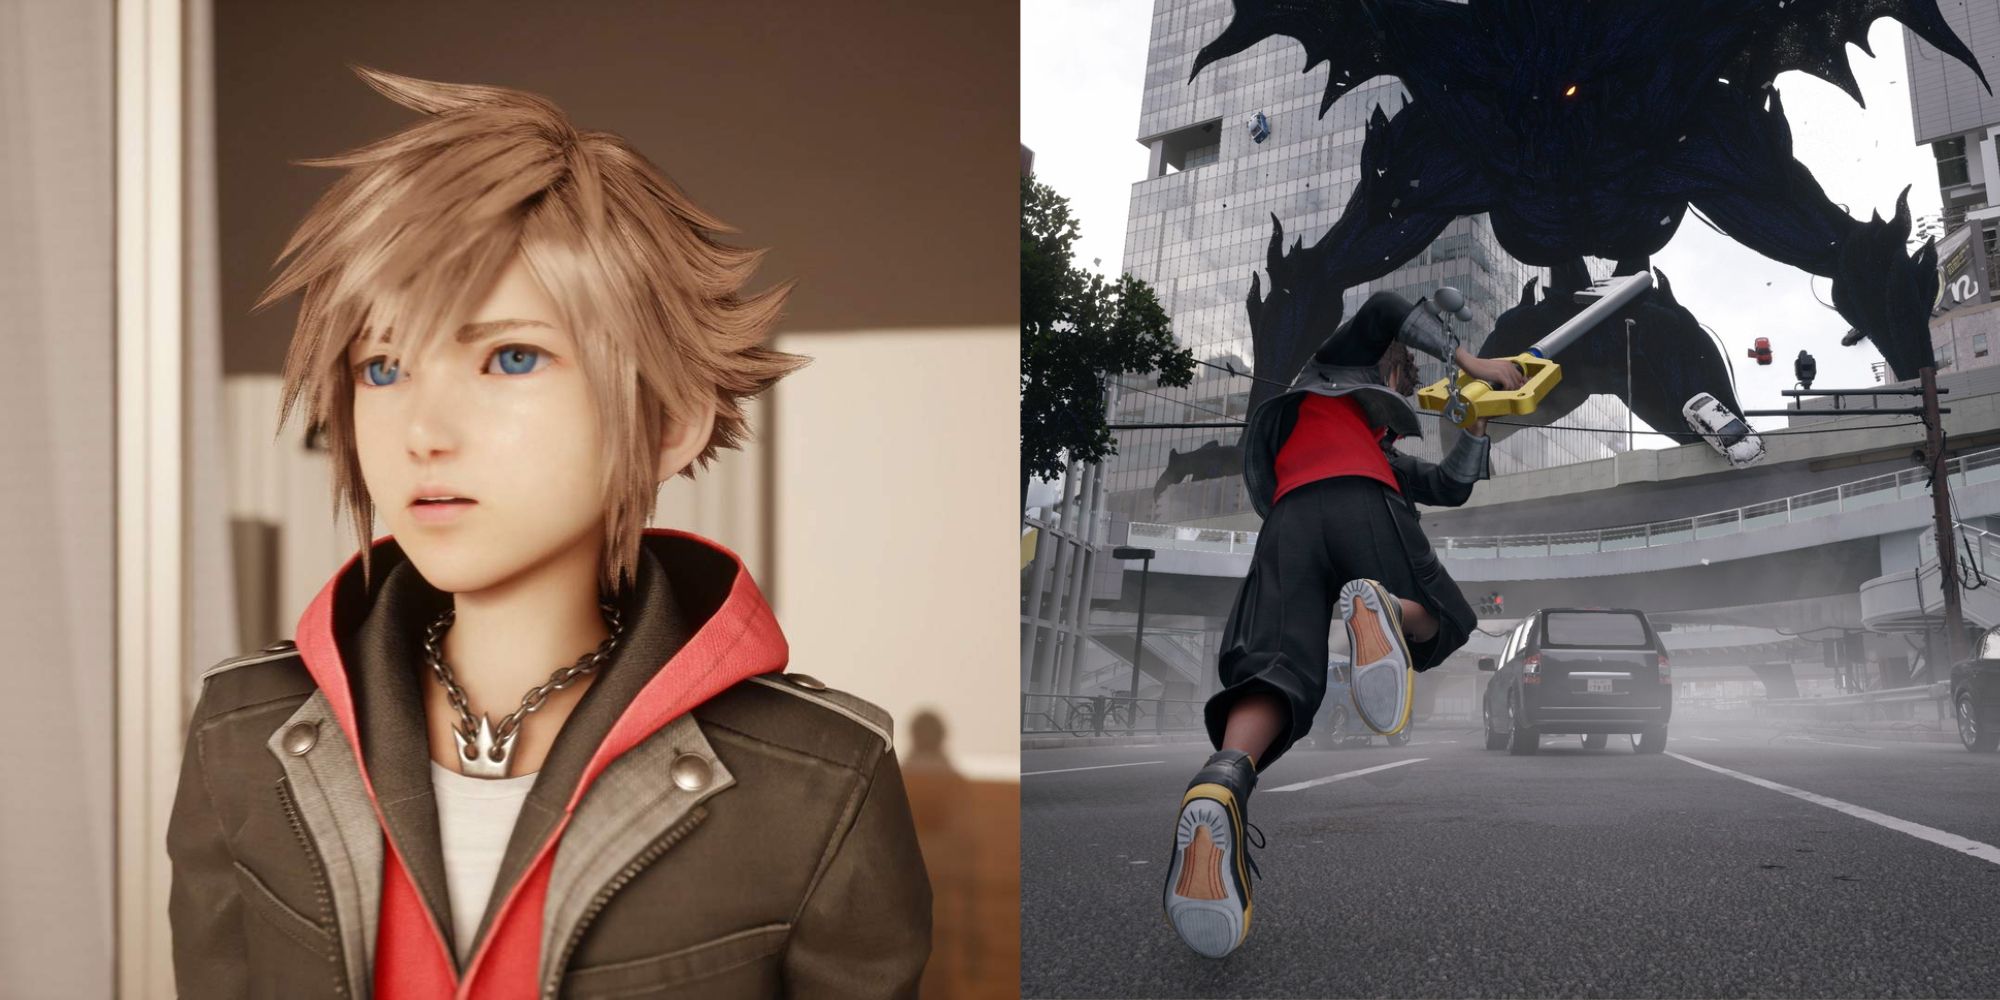 Screenshots from Kingdom Hearts 4. Sora stands on the left, looking concerned. On the right, Sora dashes towards a towering beast with the keyblade. 